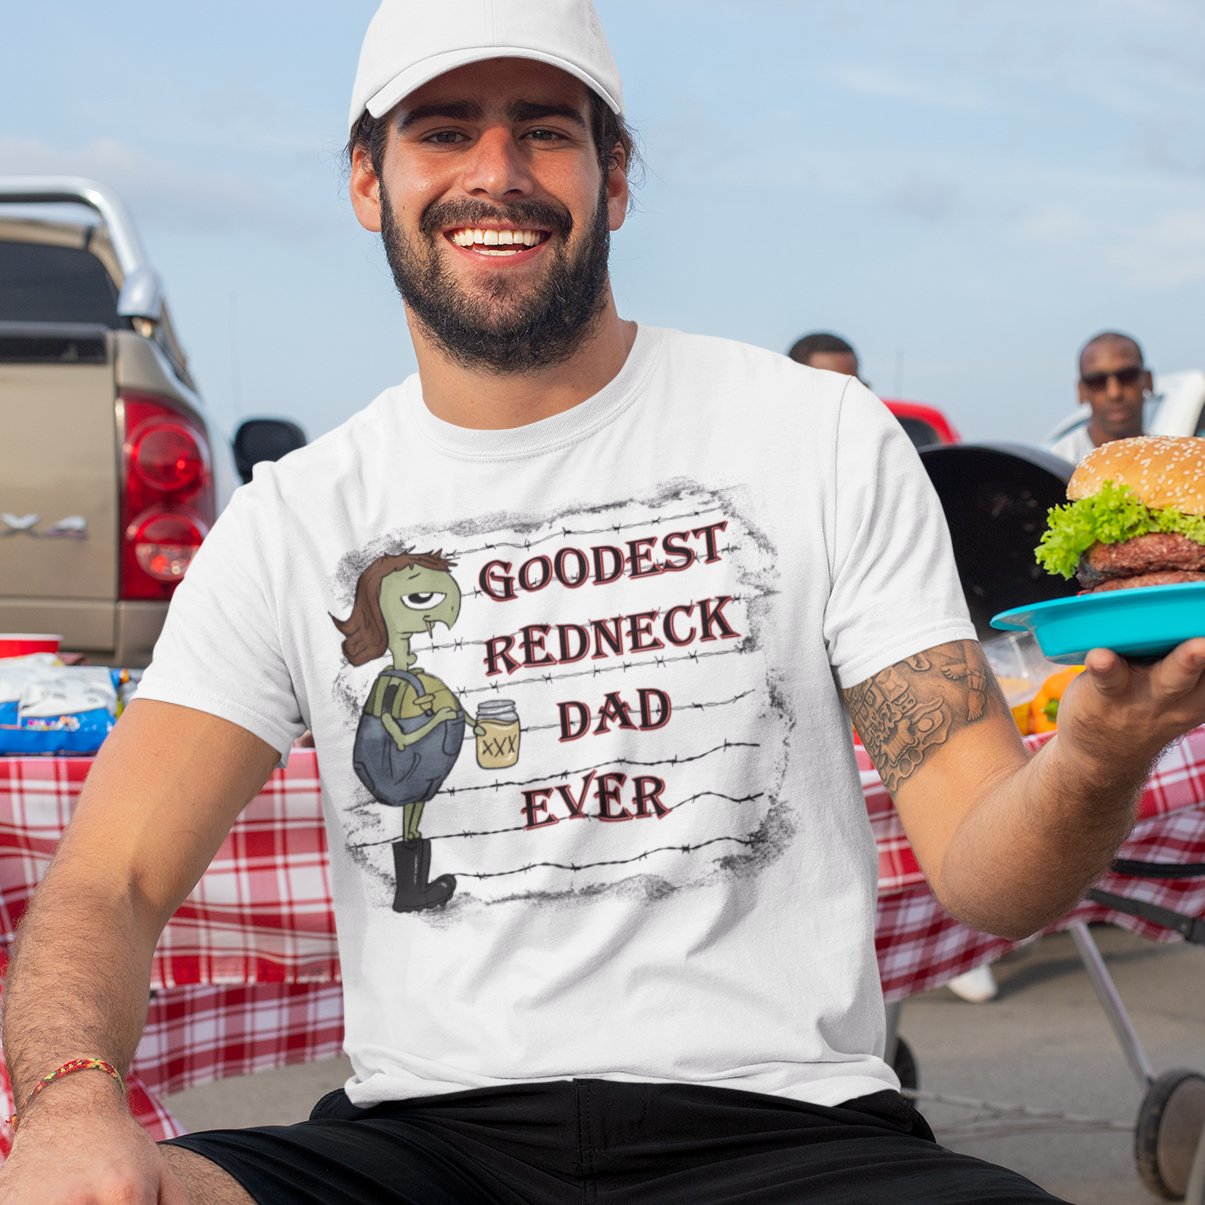 Man wearing a goodest redneck dad ever t-shirt with a redneck looking turtle on it